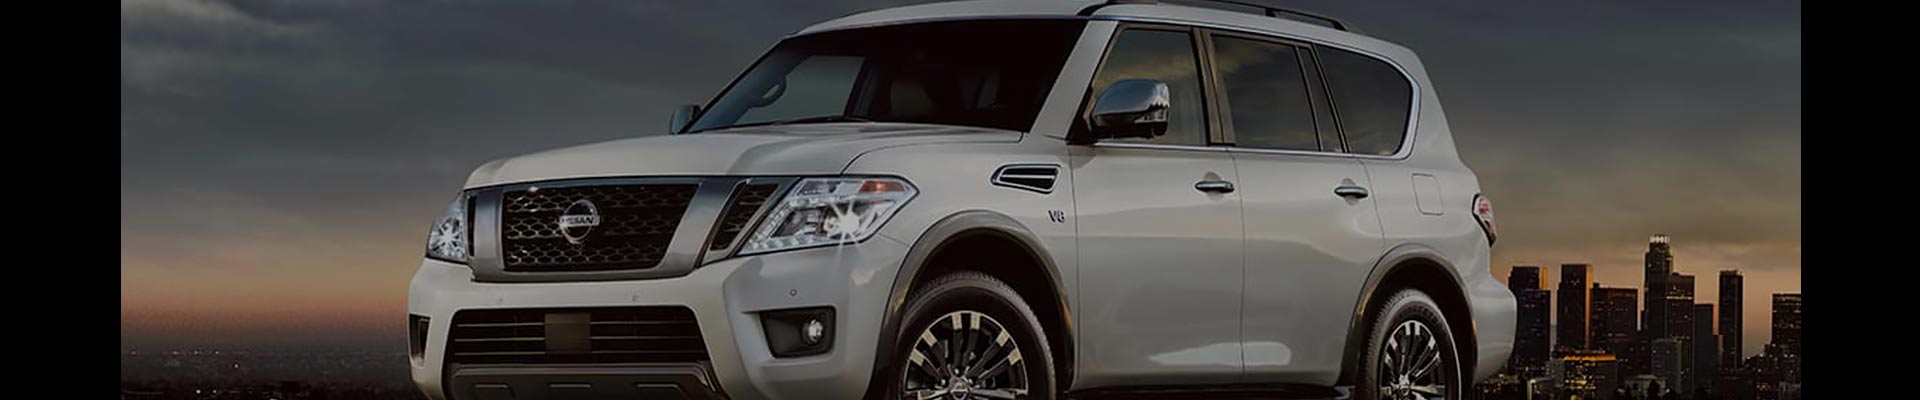 Shop Replacement and OEM 2021 Nissan Armada Parts with Discounted Price on the Net